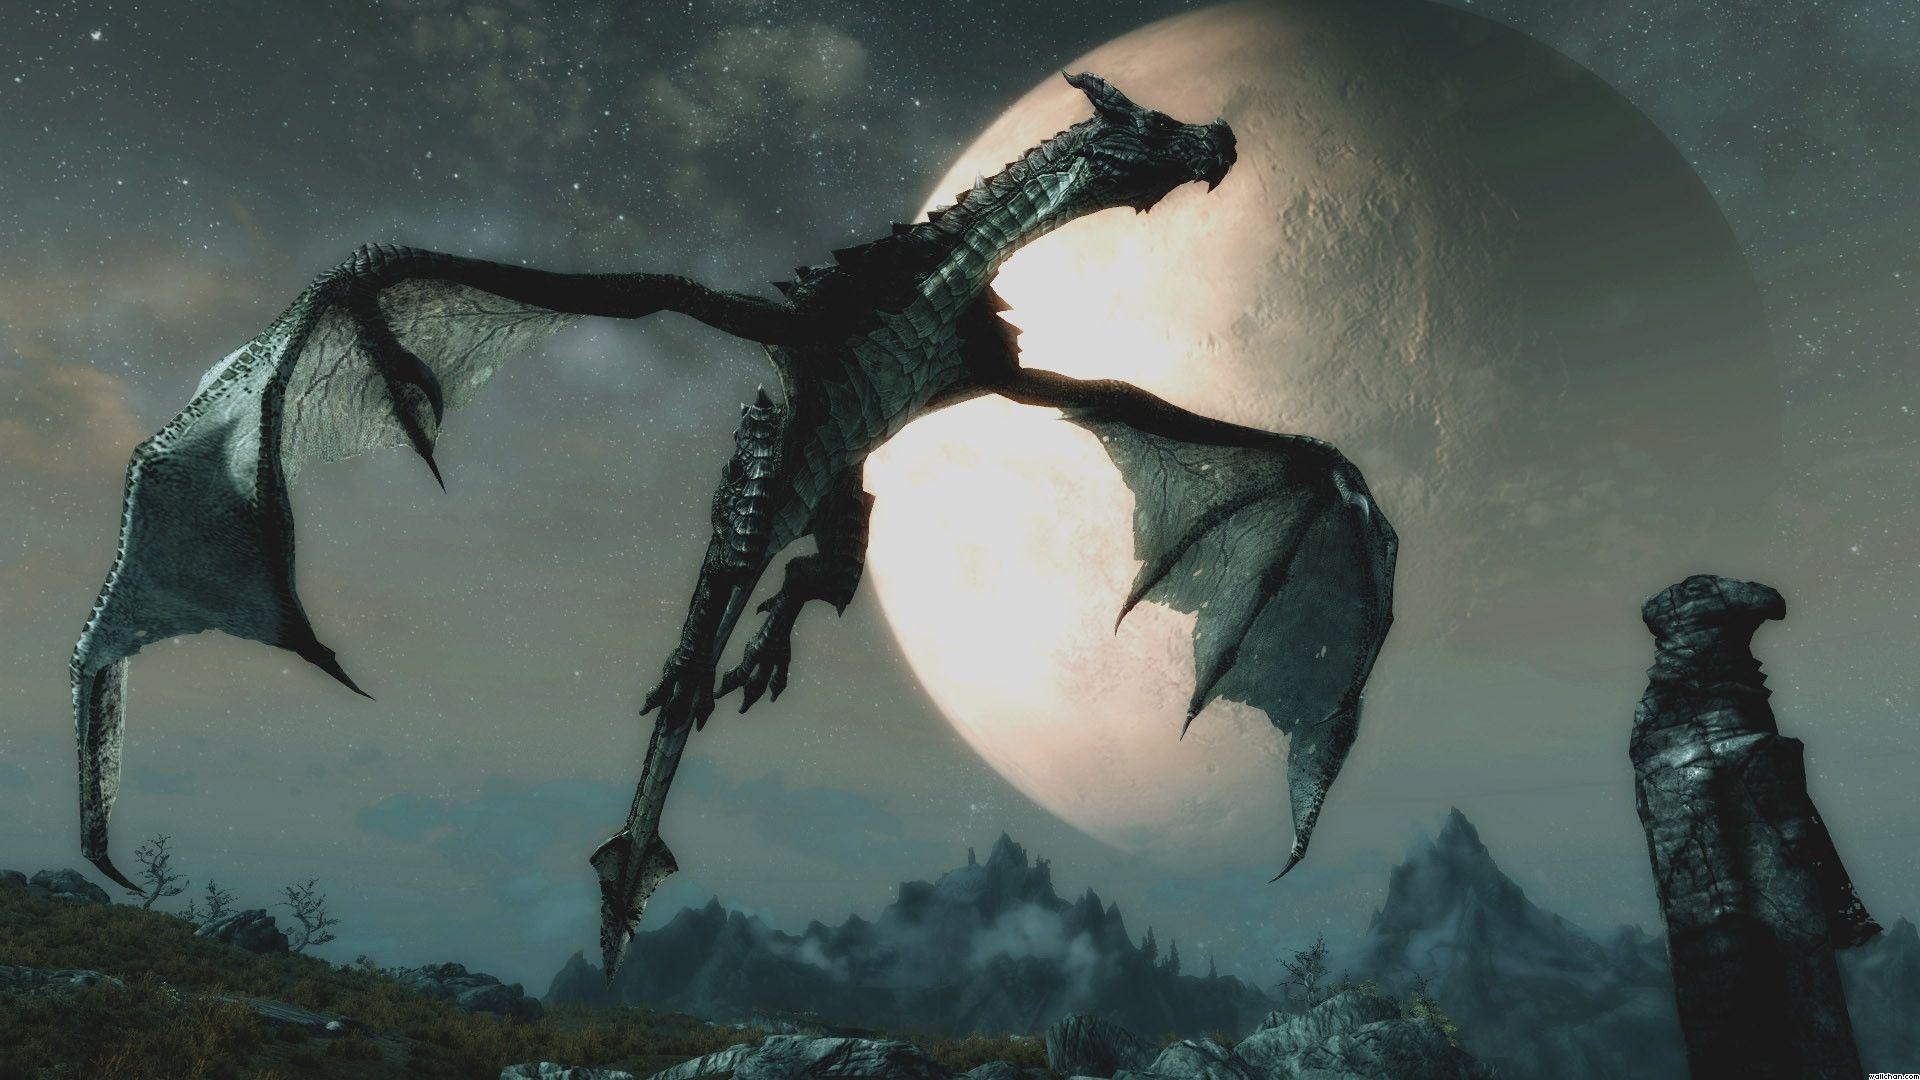 Skyrim Dragon Wallpaper Background HD Dragonborn Android For Mobile